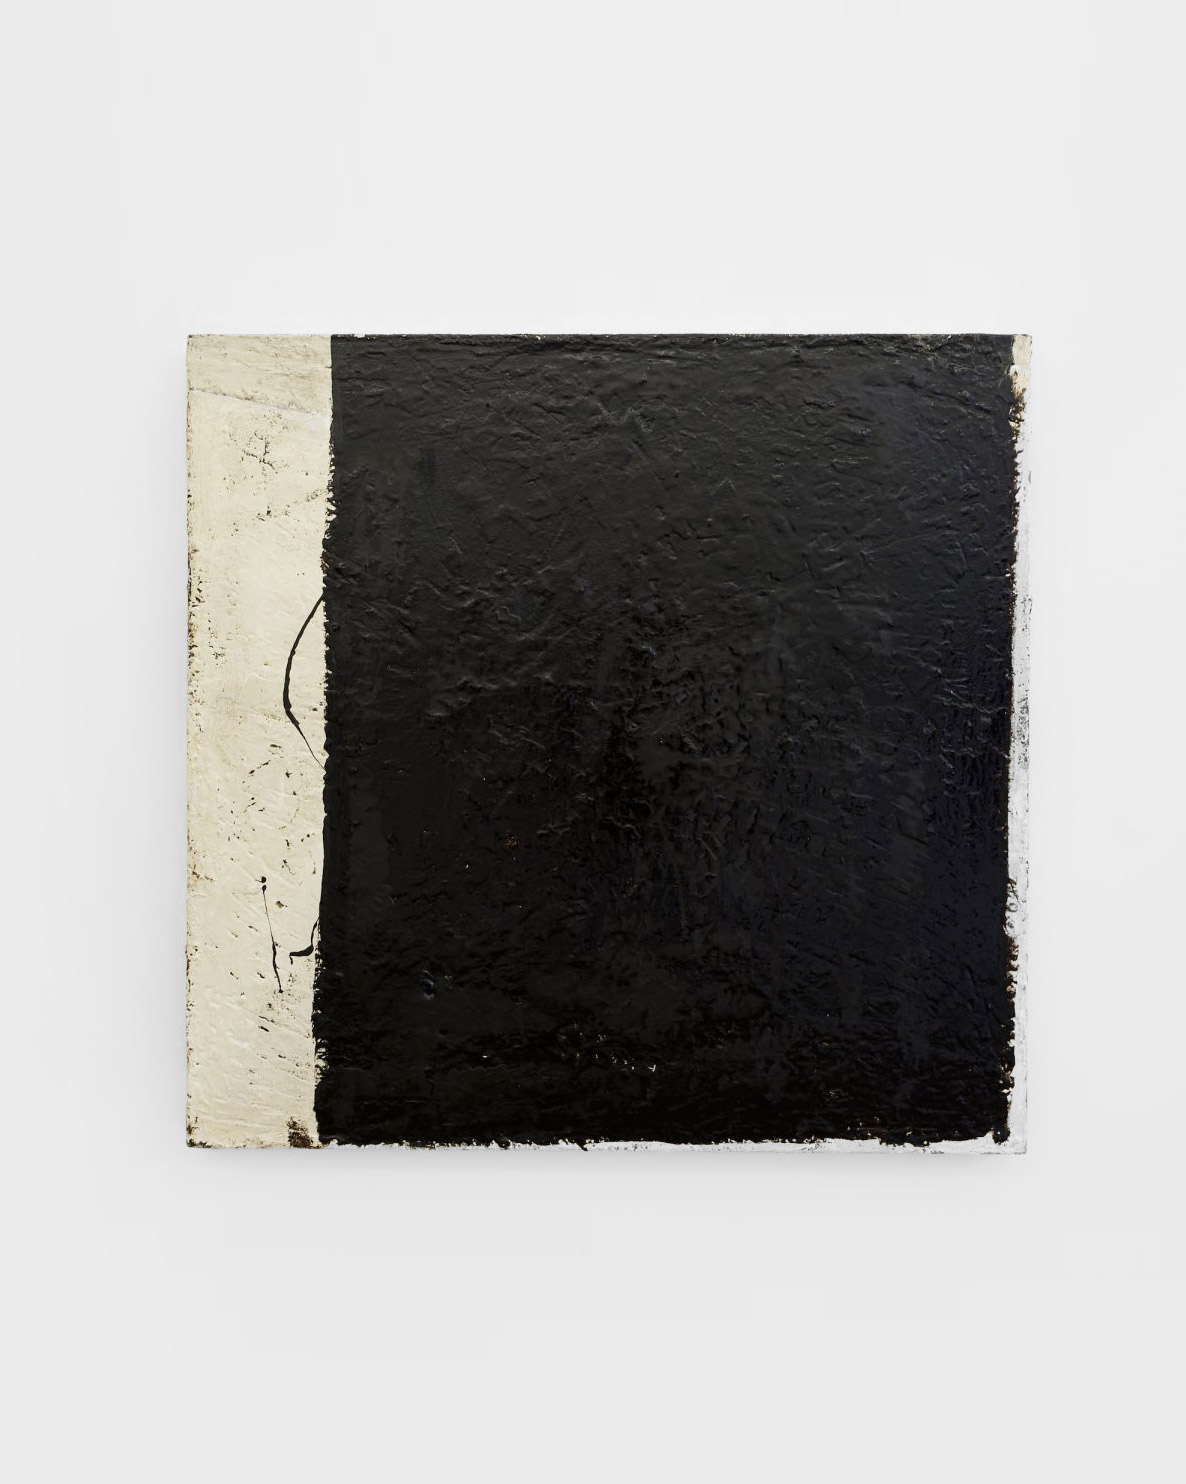 Eleanor Bartlett, Untitled No.55, 2017, Tar, metal paint on canvas, 110 x 112 cm © The Artist, Image Courtesy Tin Type Gallery